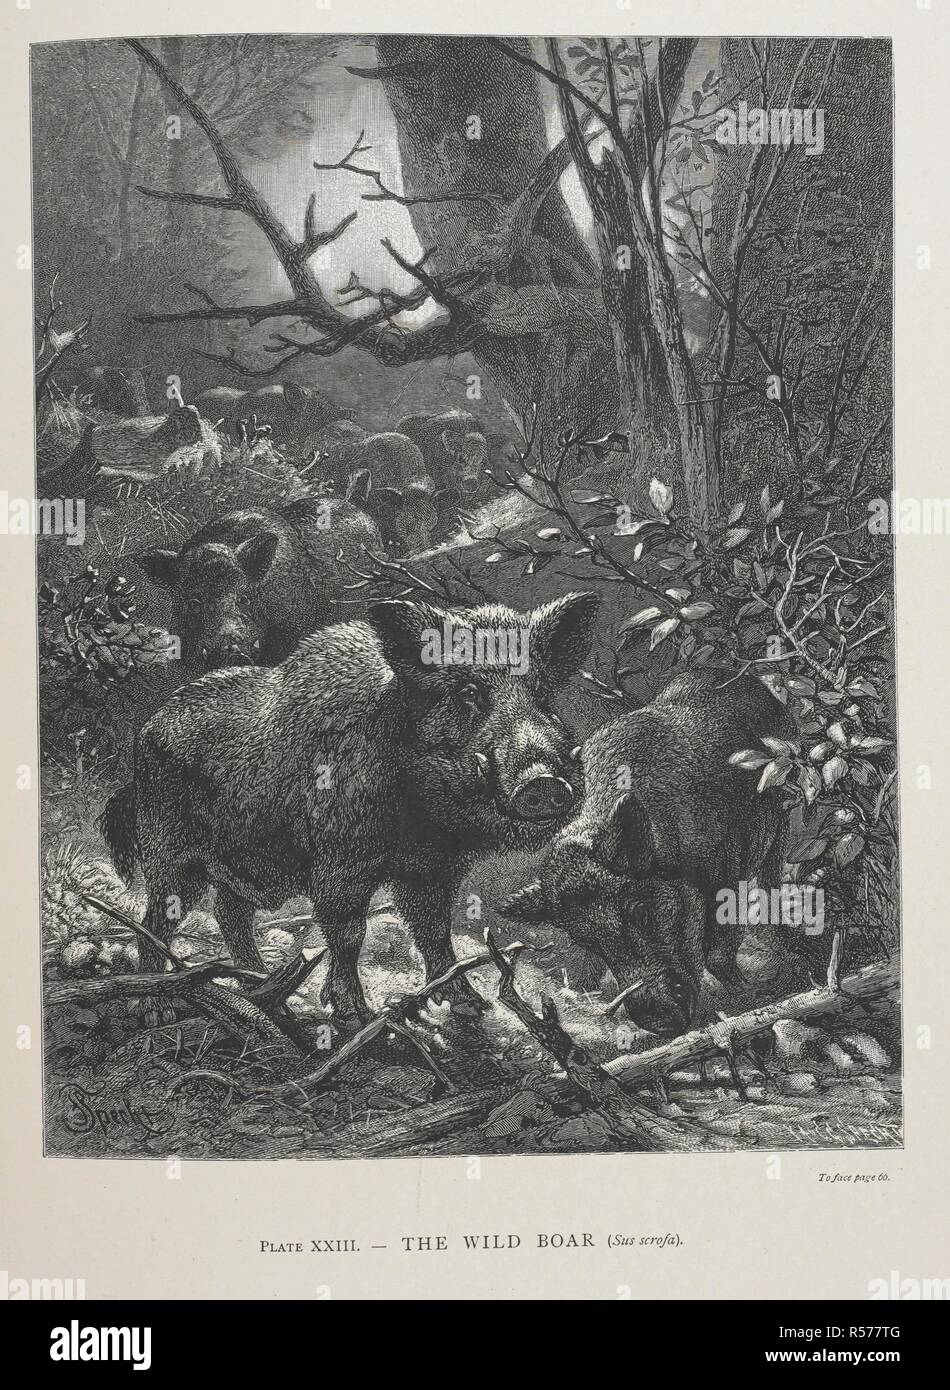 The Wild Boar. The Geographical Distribution of Animals, with a study of the relations of living and extinct faunas as elucidating the past changes of the earth's surface. ... . London, 1876. Source: 07209.dd.1 plate XXIII. Author: WALLACE, ALFRED RUSSEL. Stock Photo